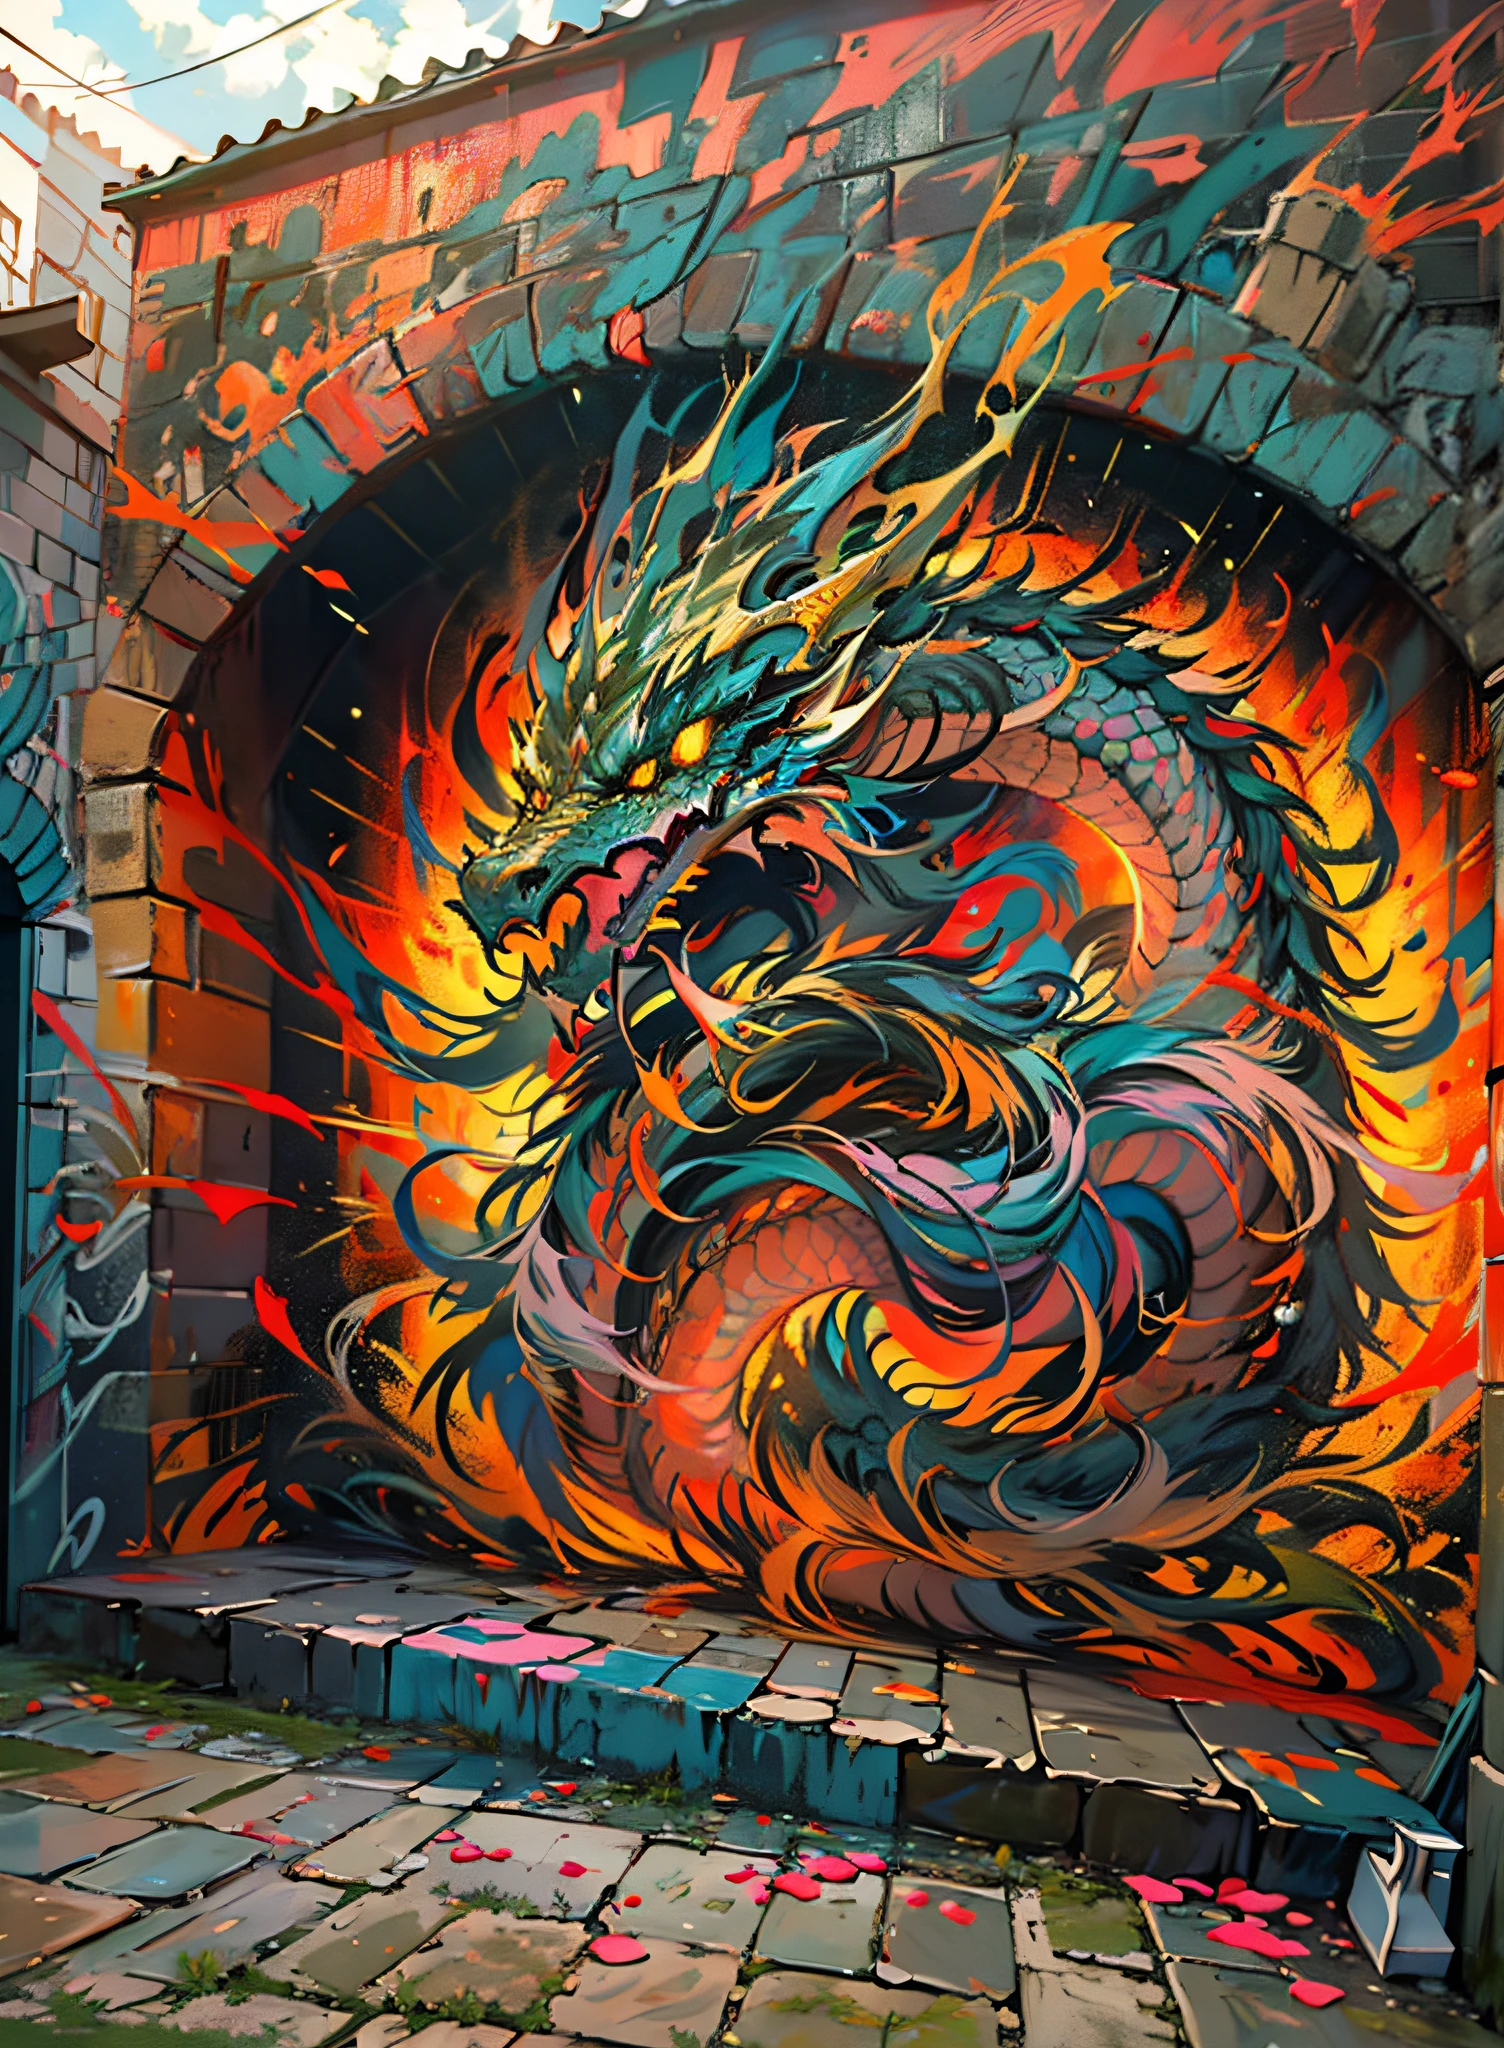 Drop Art , Cinematic scene - filmed in the dark,(extremely detaild), oriental dragon high resolution mural painting,((walls of a castle)), colorful graffiti,(( Drop Artdinâmico)) and vivid, swirly vibrant colors, expressive brushstrokes, street art vibe.32 megapixel